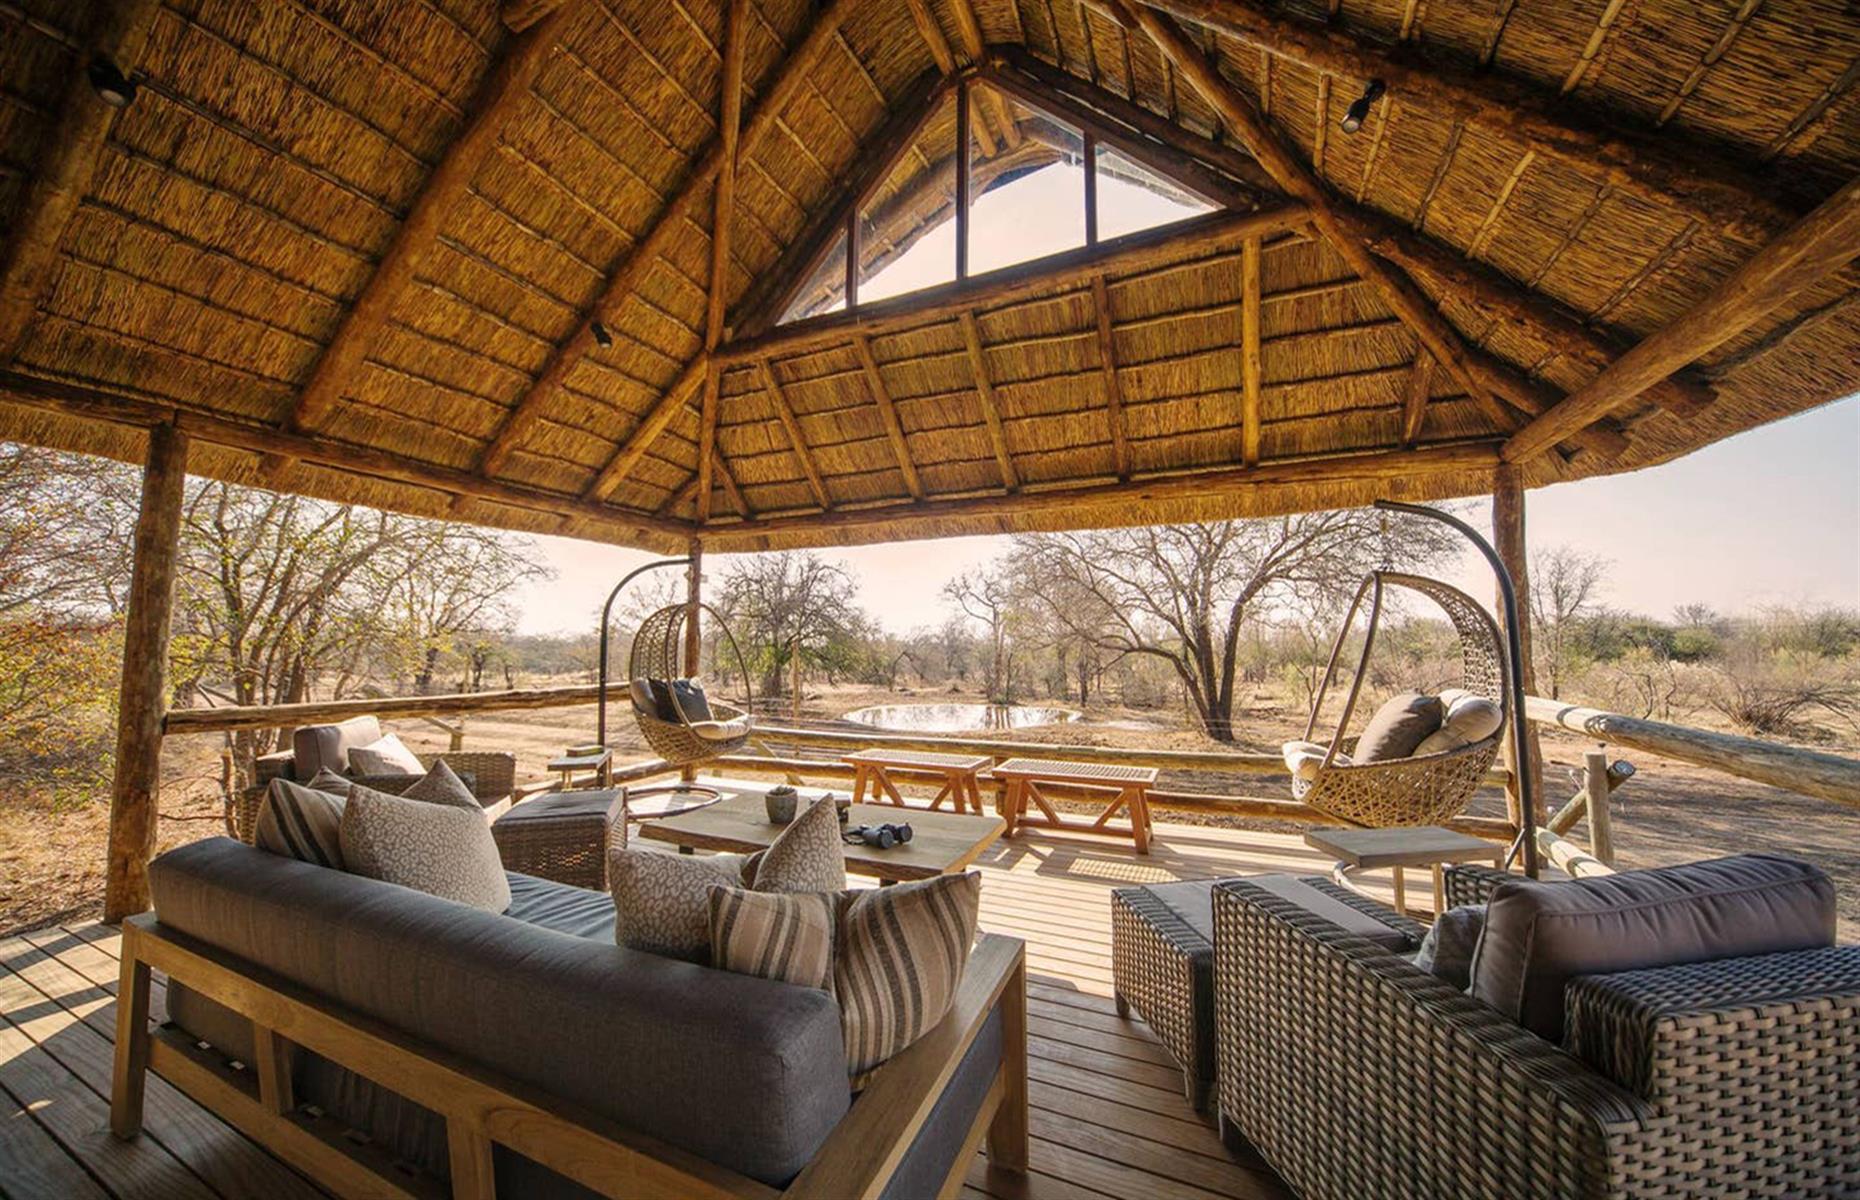 <p>Located on the edge of Pilanesberg National Park, <a href="https://www.airbnb.co.uk/rooms/20891589">this luxurious safari lodge</a> is anything but ordinary. A three-hour drive from Pretoria and Johannesburg, the Nkala Safari Lodge is on a black rhino game reserve and there are plenty of wild animals to spot from the private patio or through the floor-to-ceiling windows. There's also a swimming pool, a kitchen and a viewing deck for taking in the surrounding wilderness.</p>